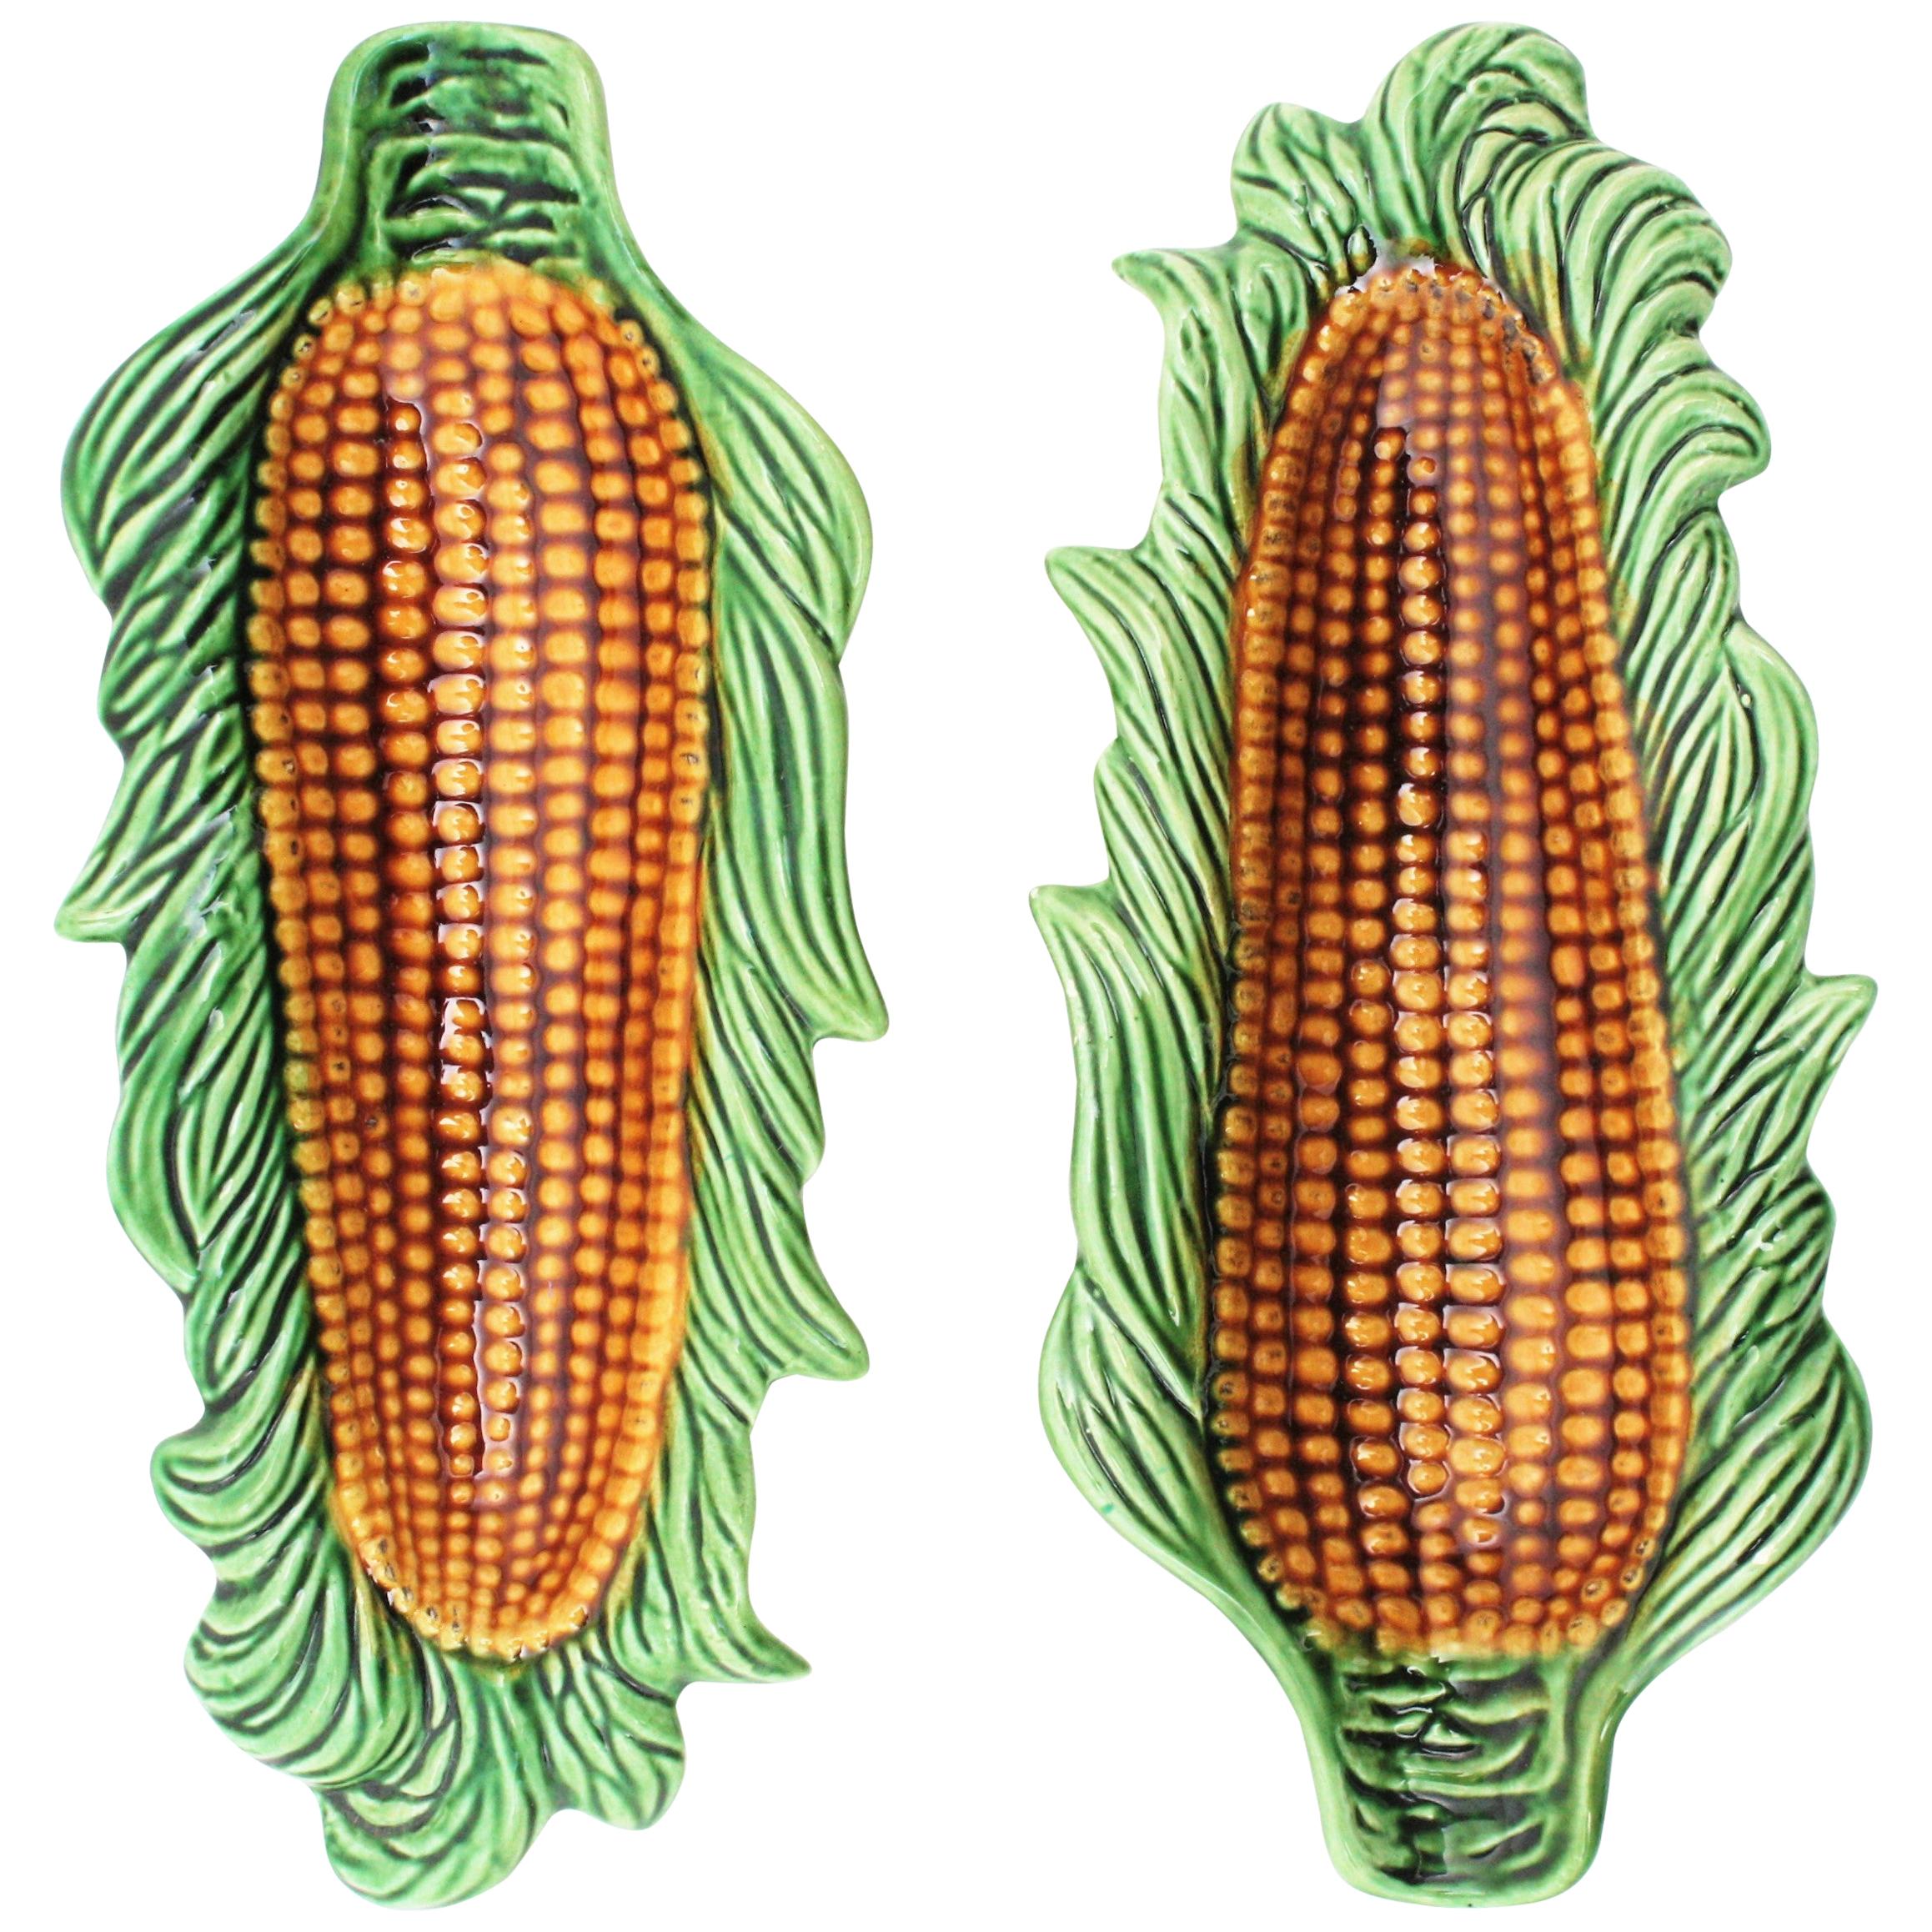 Pair of Midcentury Glazed Ceramic Corn on the Cob Dishes, Portugal, 1960s